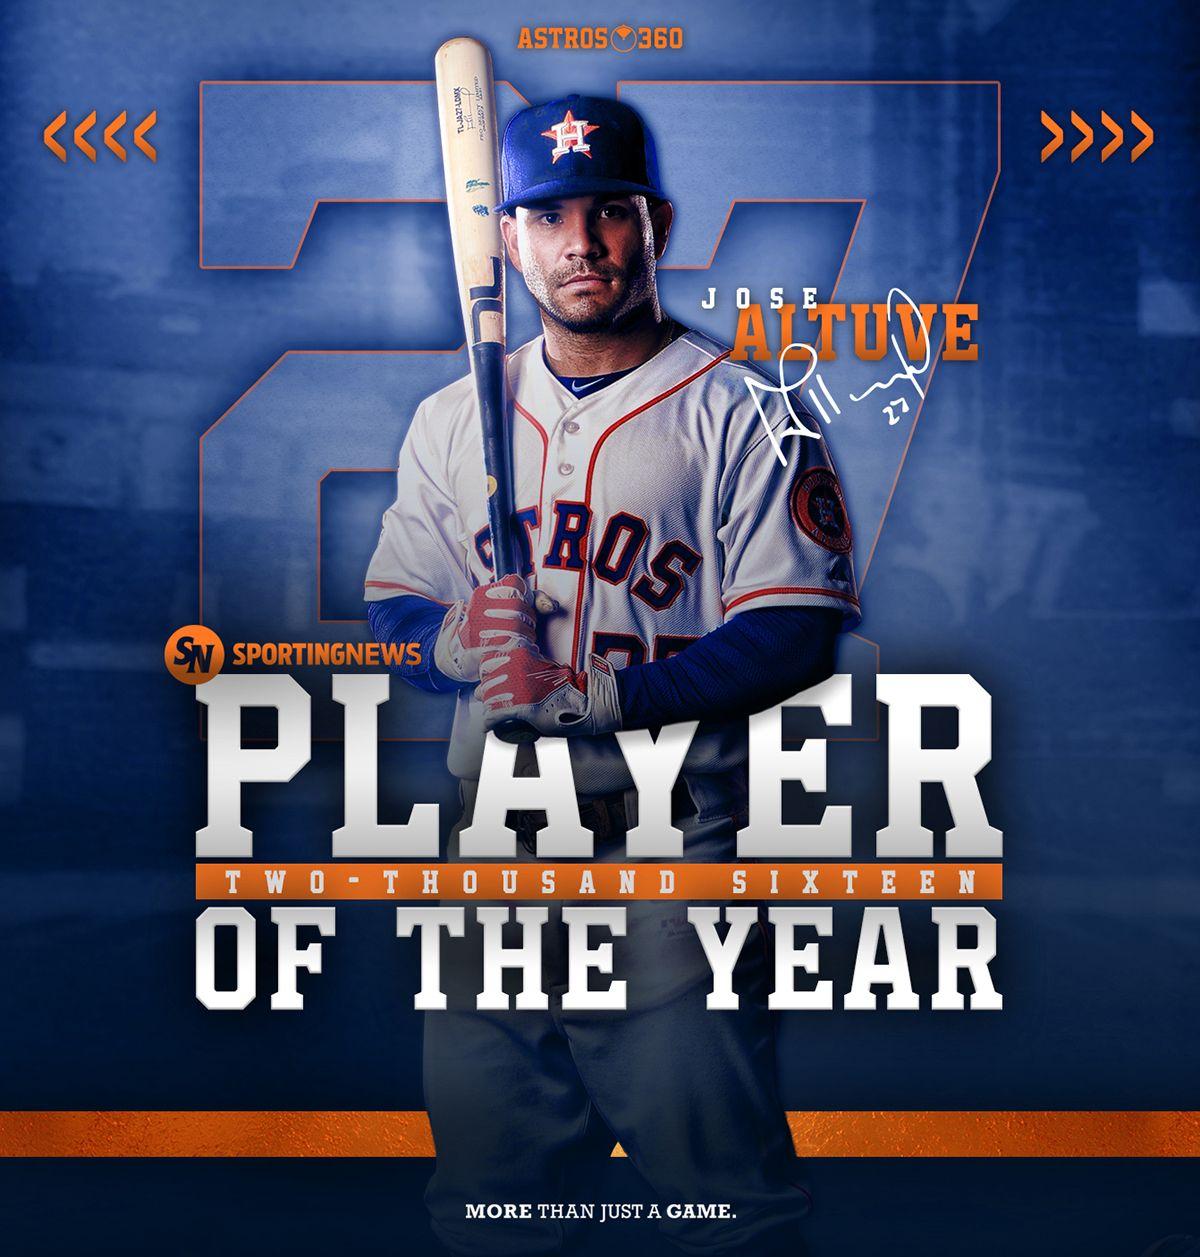 Image: Jose Altuve, Player of the Year